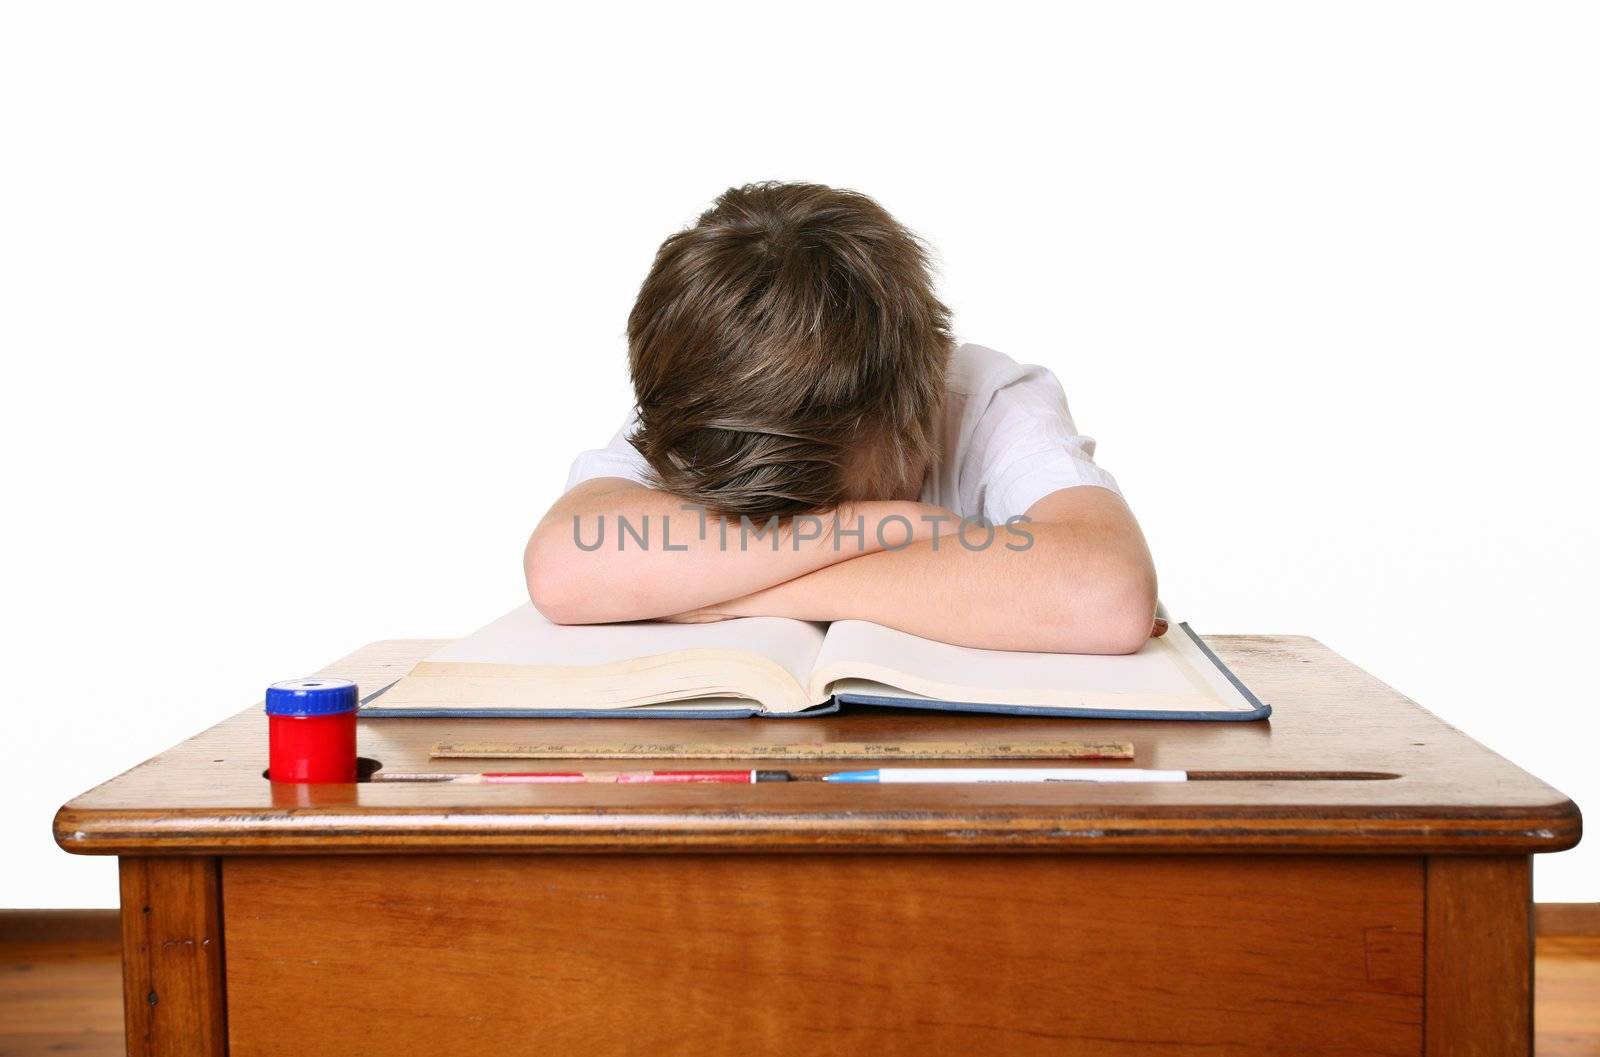 A unhappy or frustrated schoolboy sitting at desk and bent over with head in hands